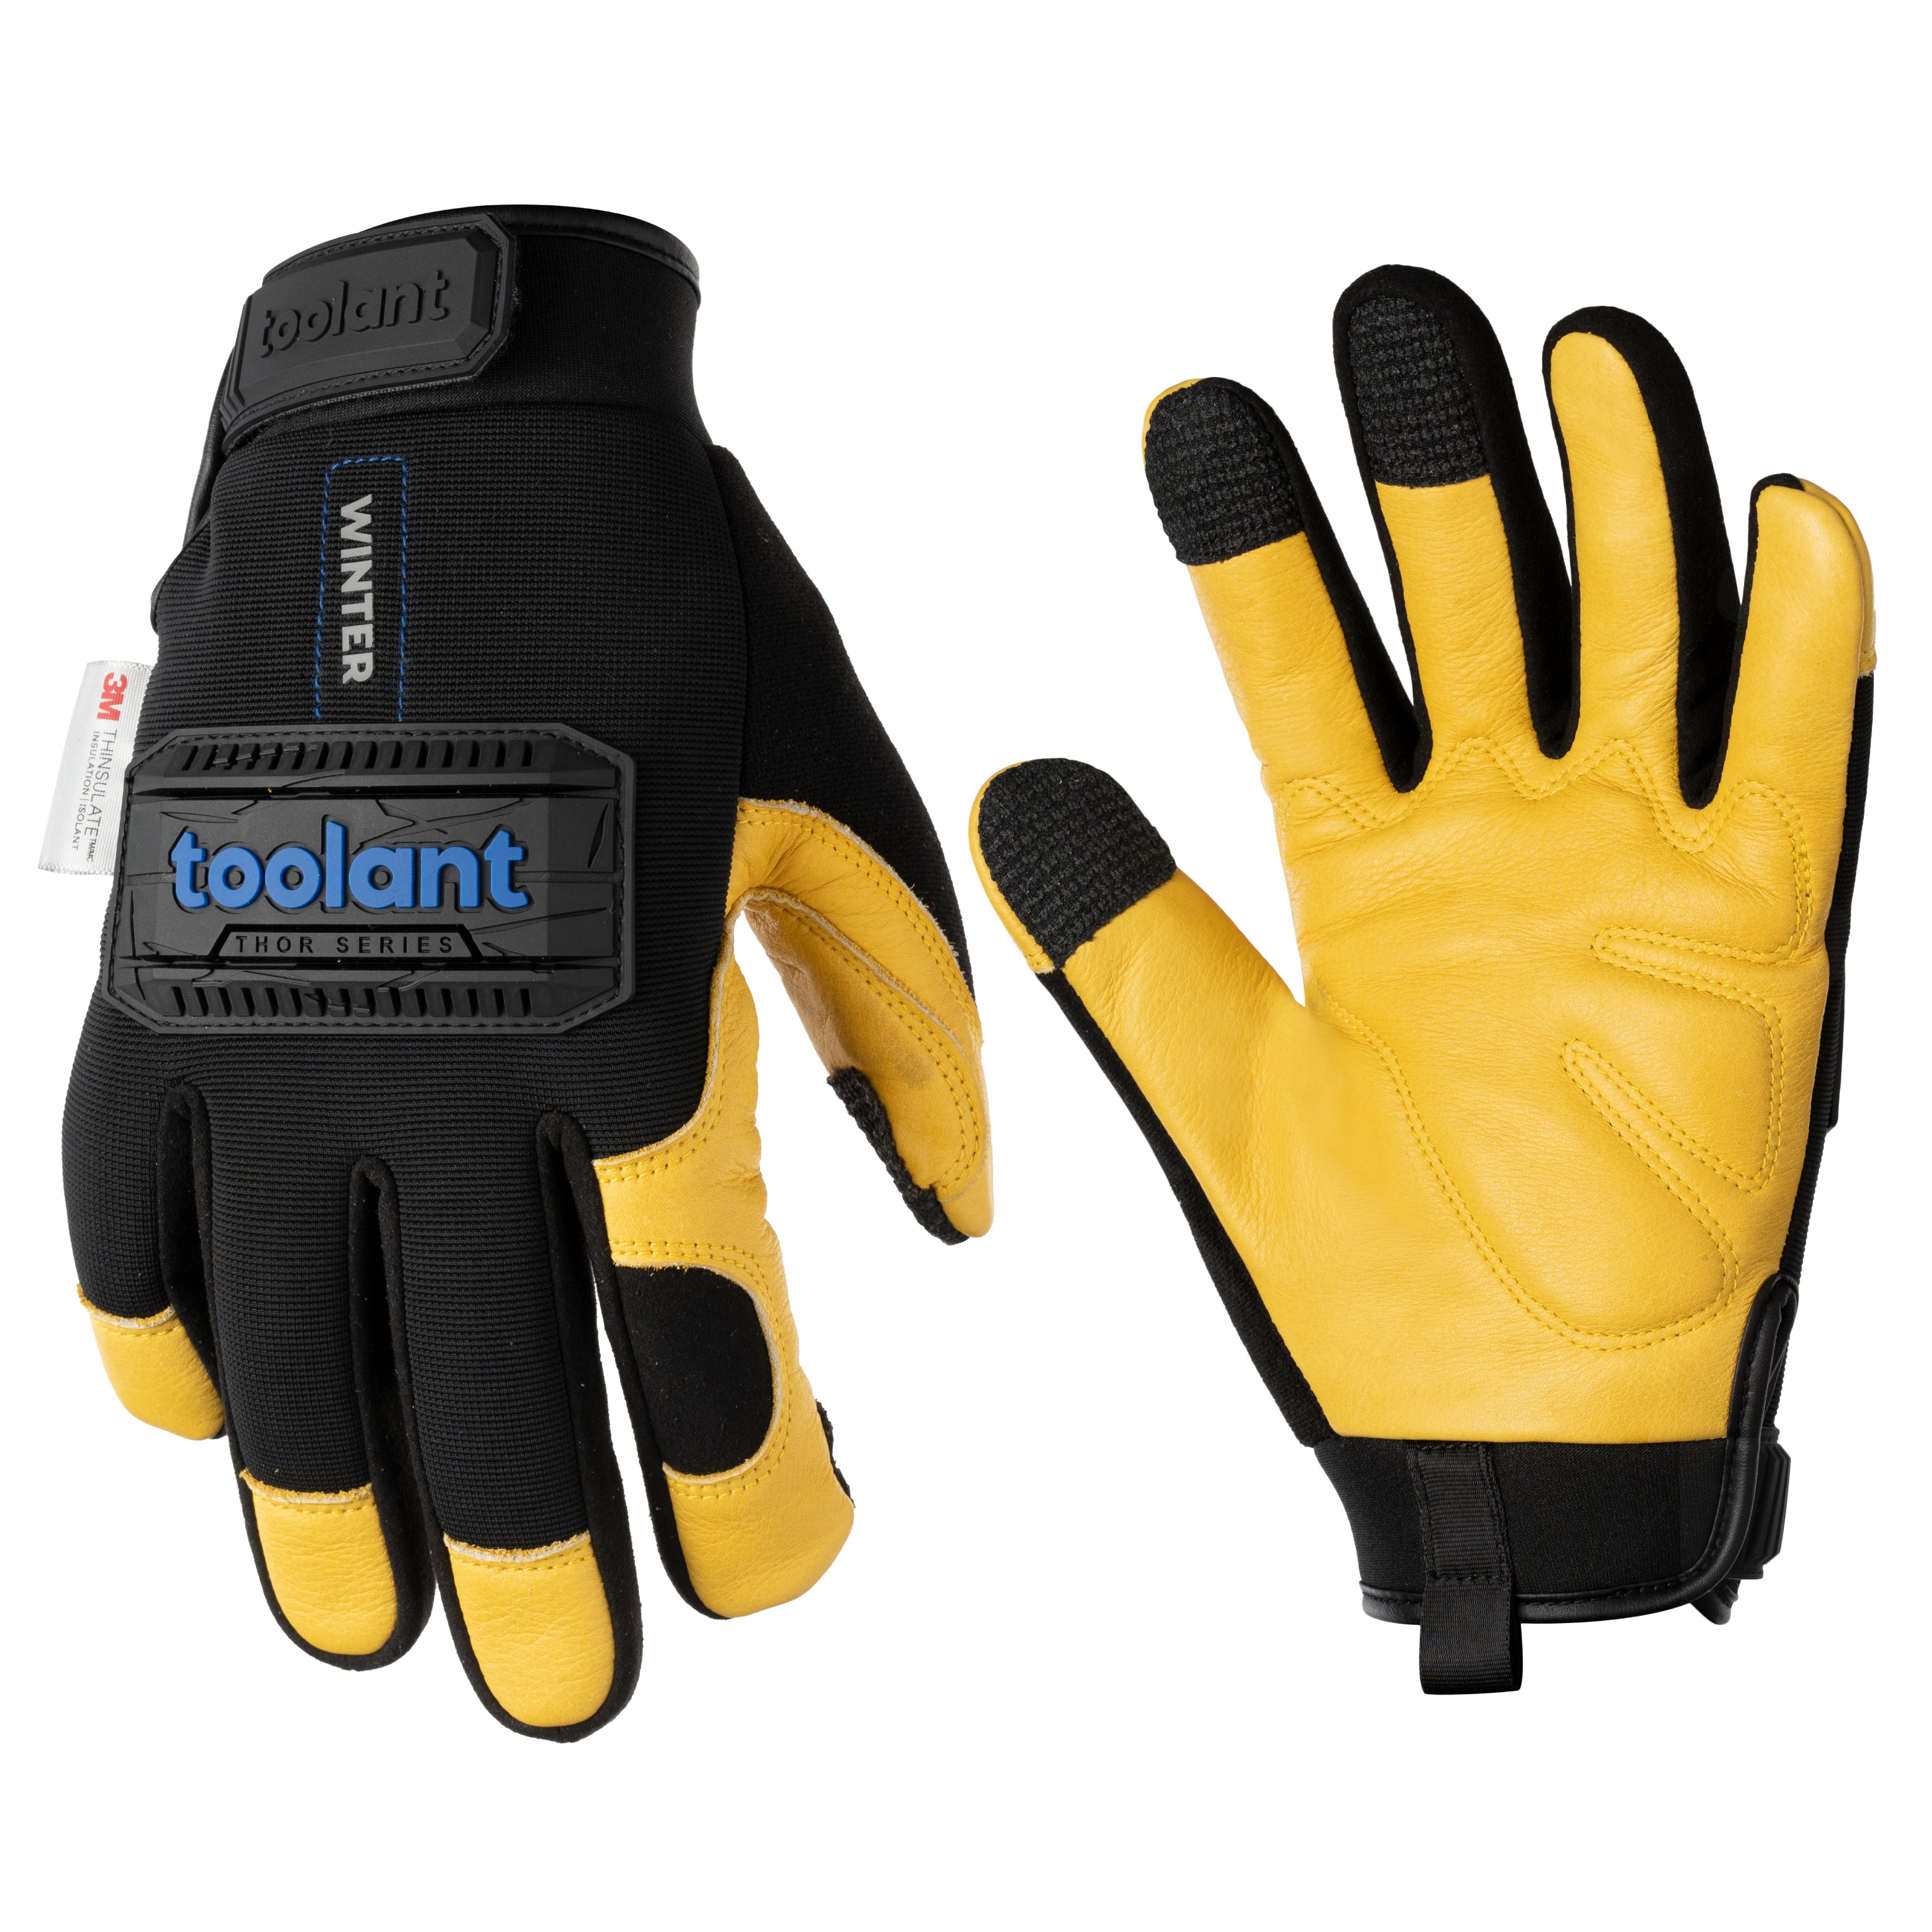 Tungsten Kevlar Lined Fabrication Glove - Black *New Colour